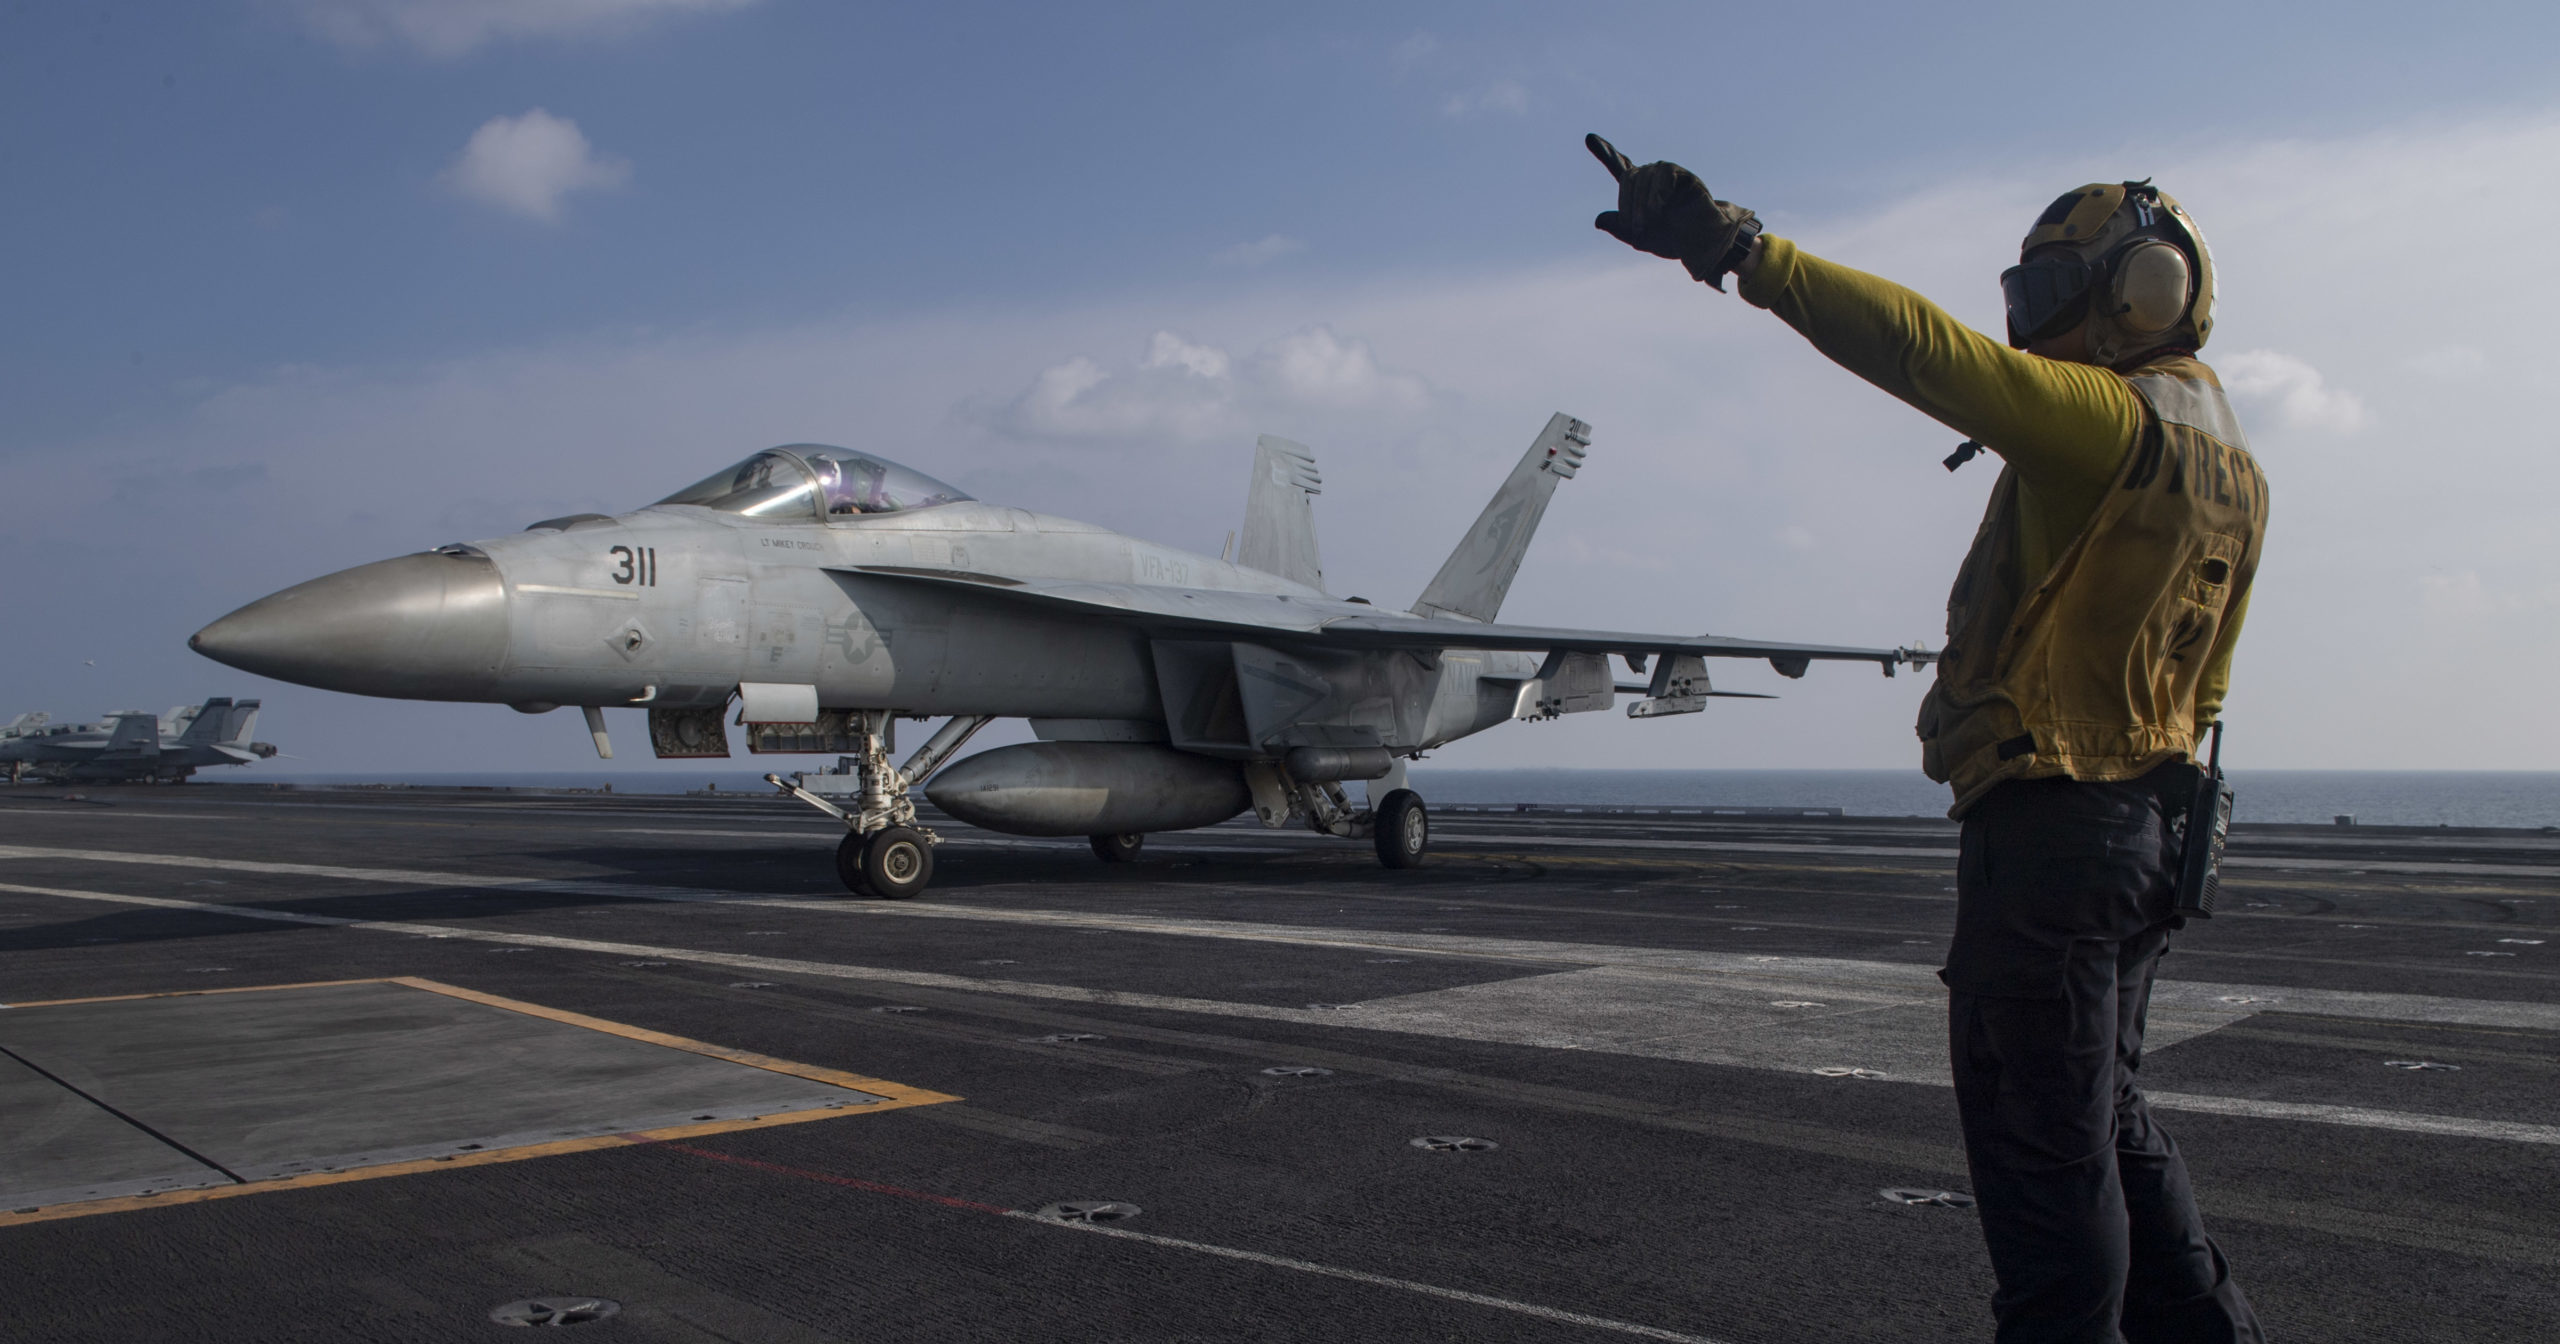 Aviation Boatswain's Mate 3rd Class Marnell Maglasang, from La Puente, California, directs an F/A-18E Super Hornet on the flight deck of the aircraft carrier USS Nimitz in the Arabian Sea on Nov. 27, 2020.